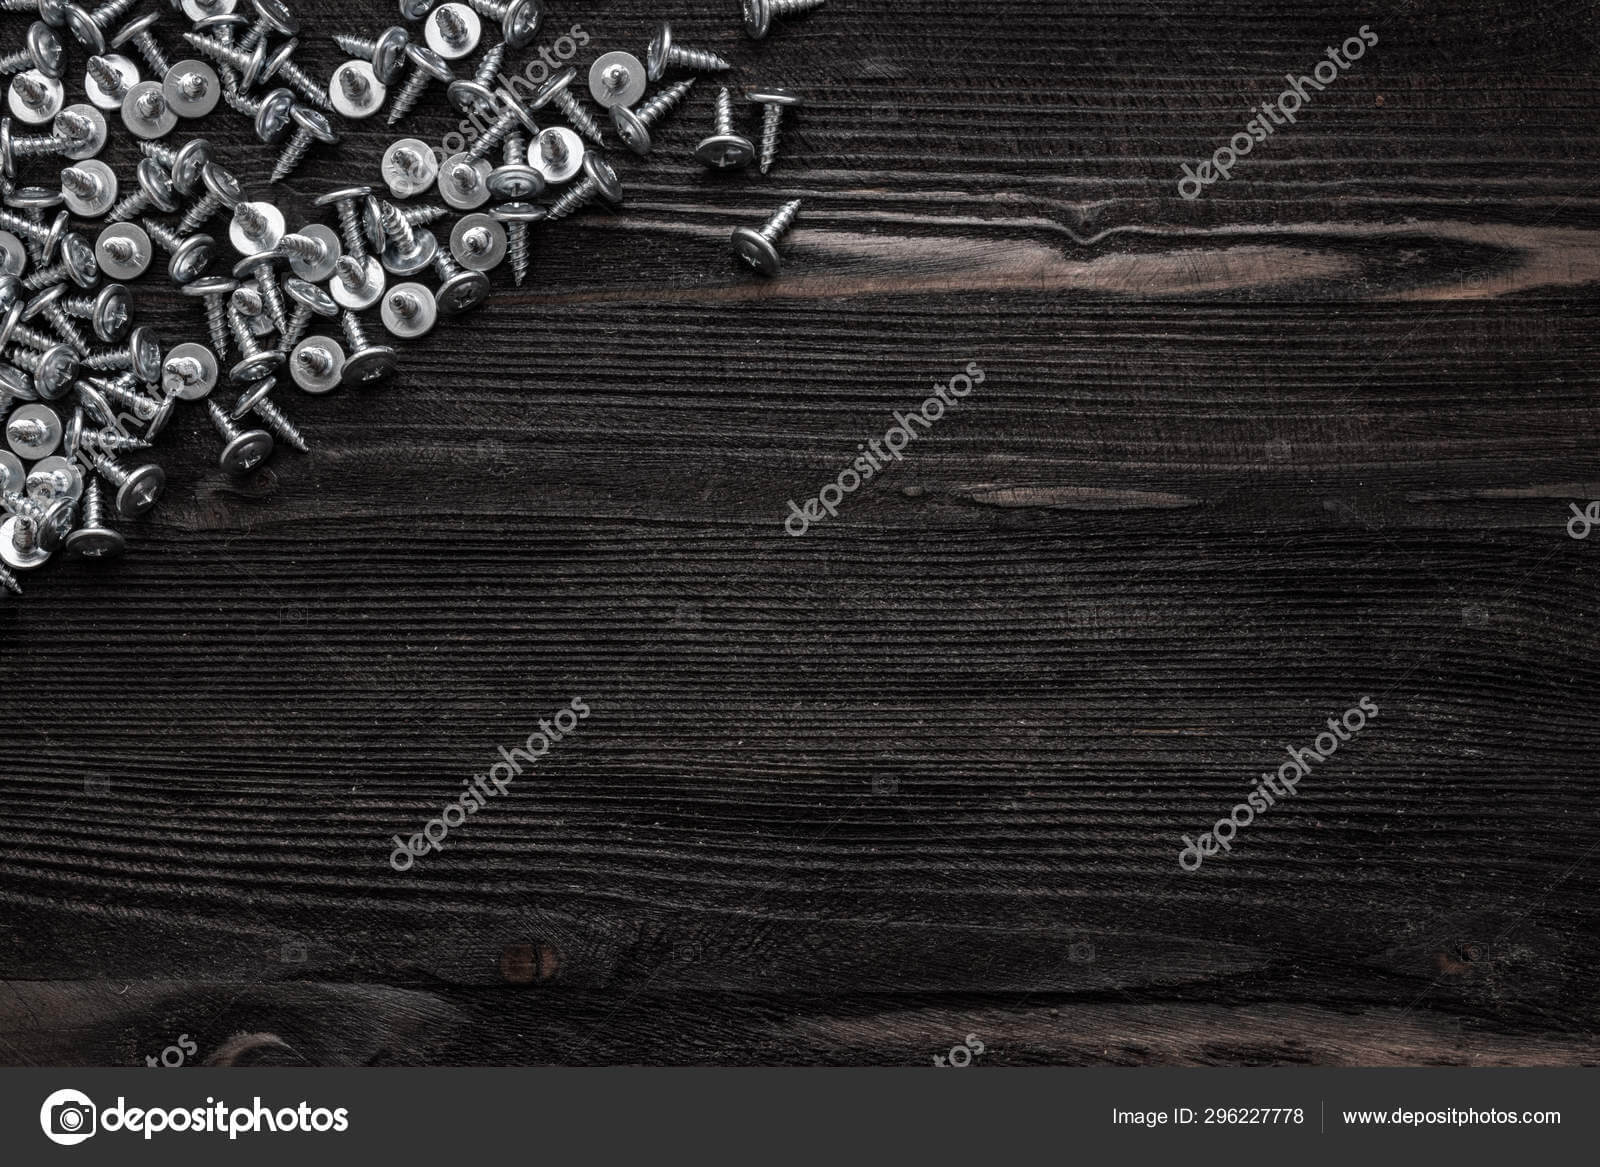 Some Wood Crews On Dark Wooden Desk Board Surface. Top View Throughout Borderless Certificate Templates